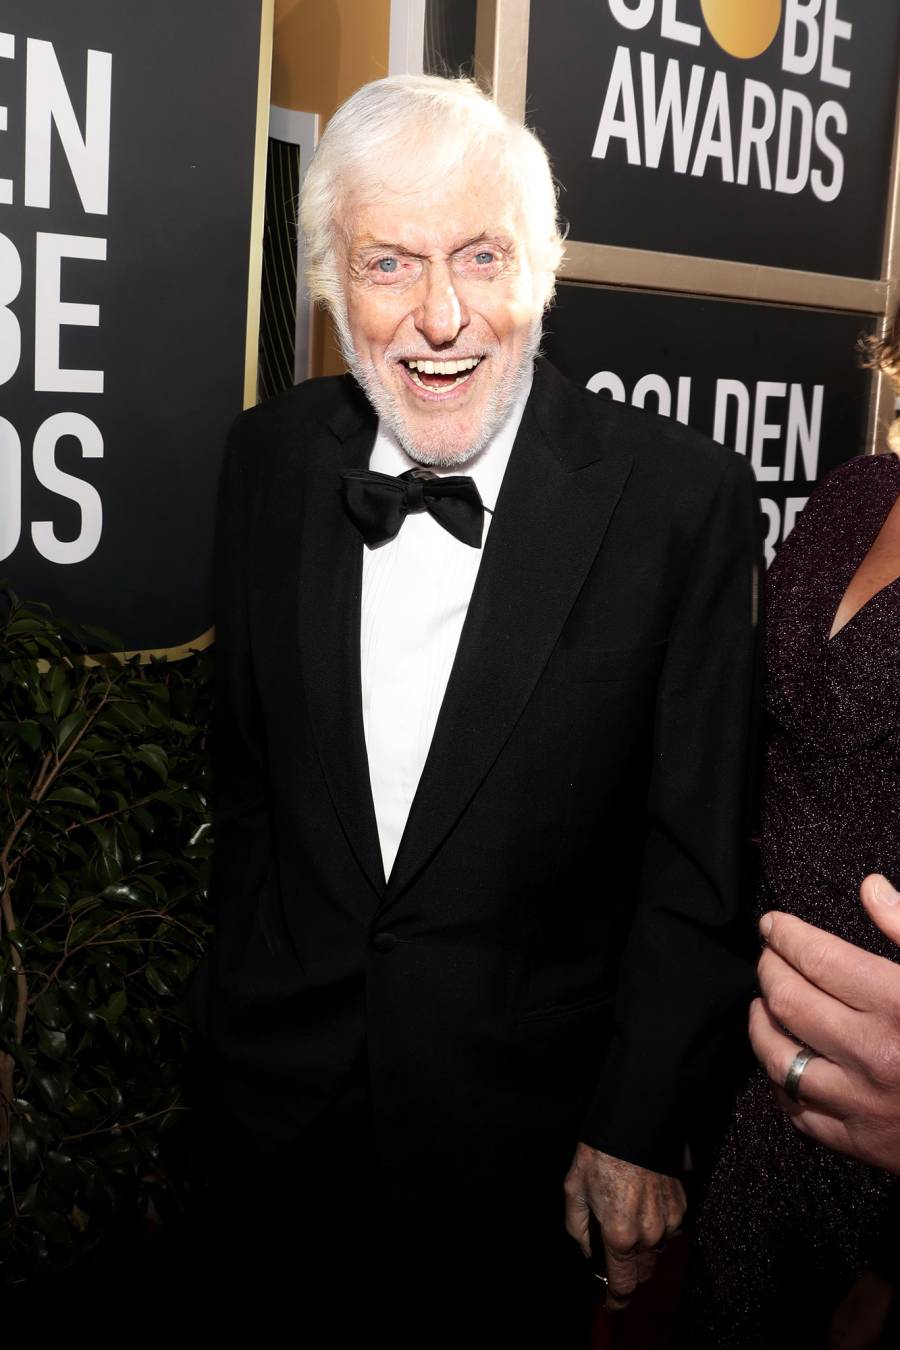 Dick Van Dyke arrives to the 76th Annual Golden Globe Awards 2019